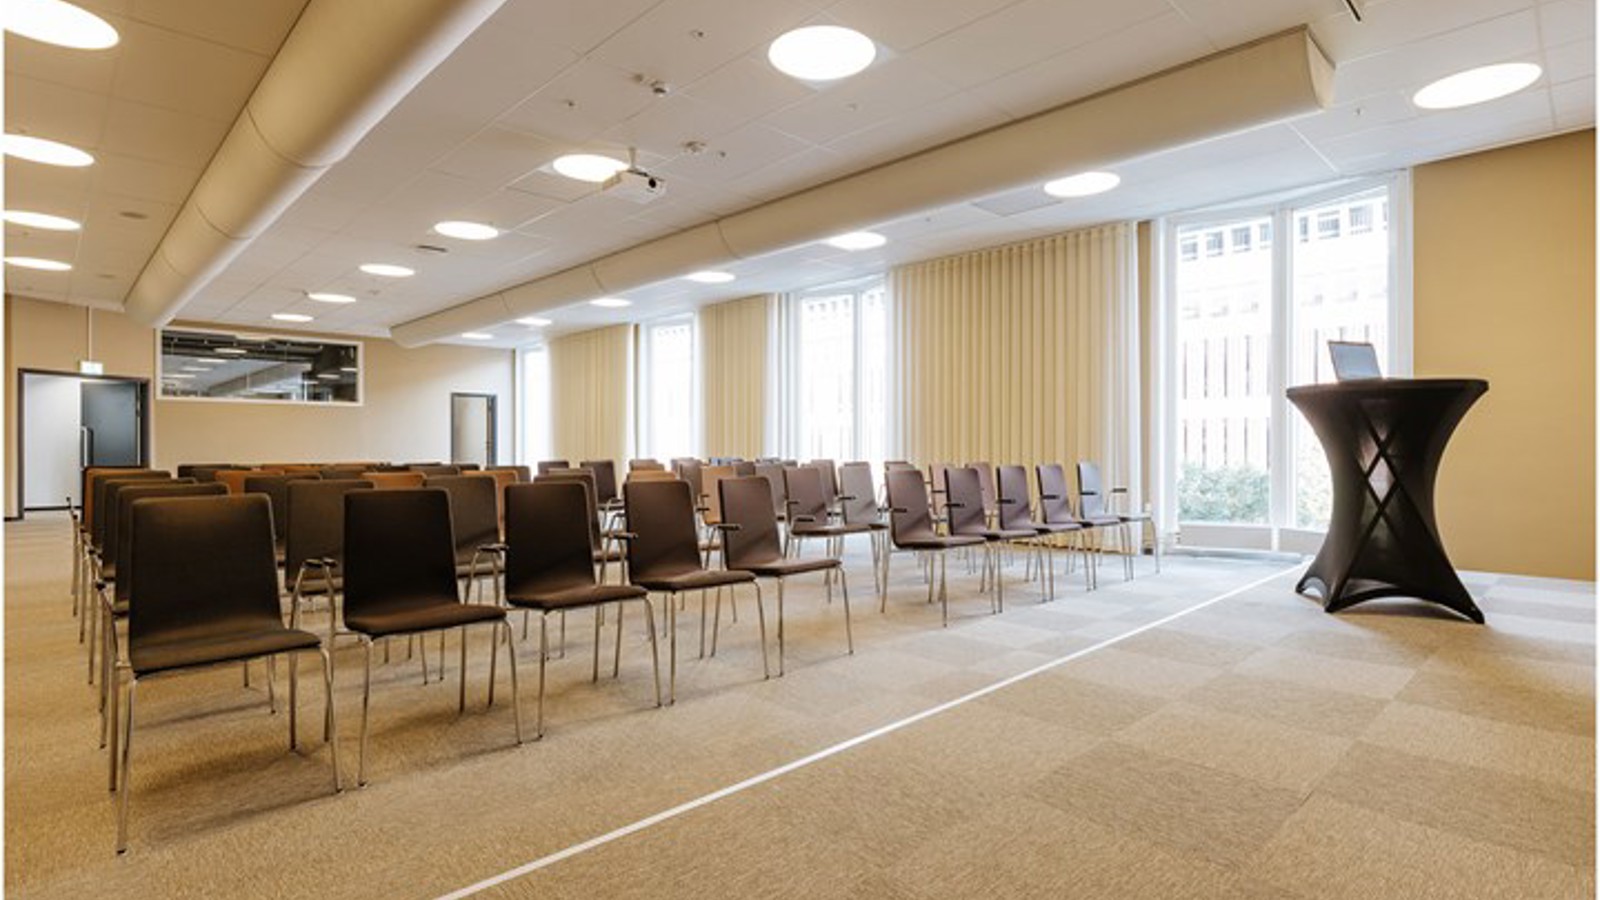 Conference room with cinema seating, stage and large windows